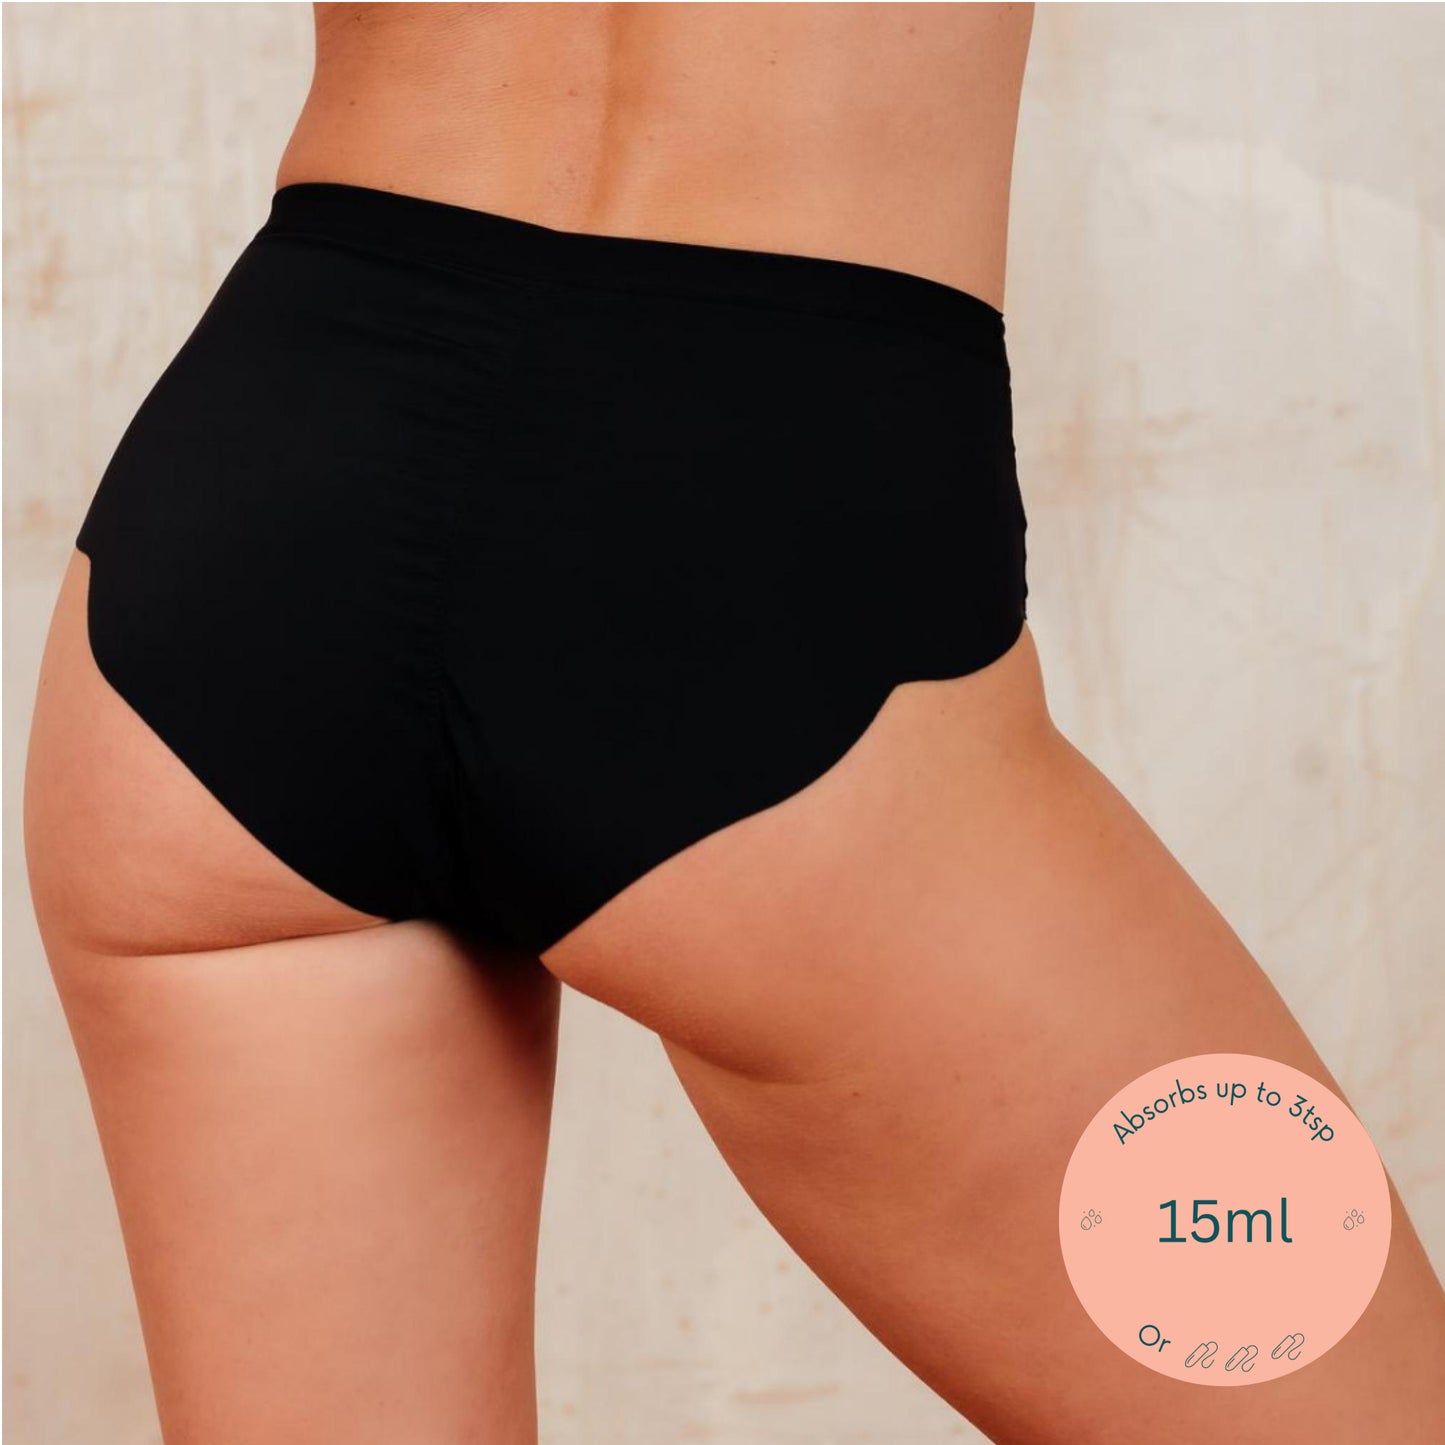 What are Nickeze Period Pants/Underwear?